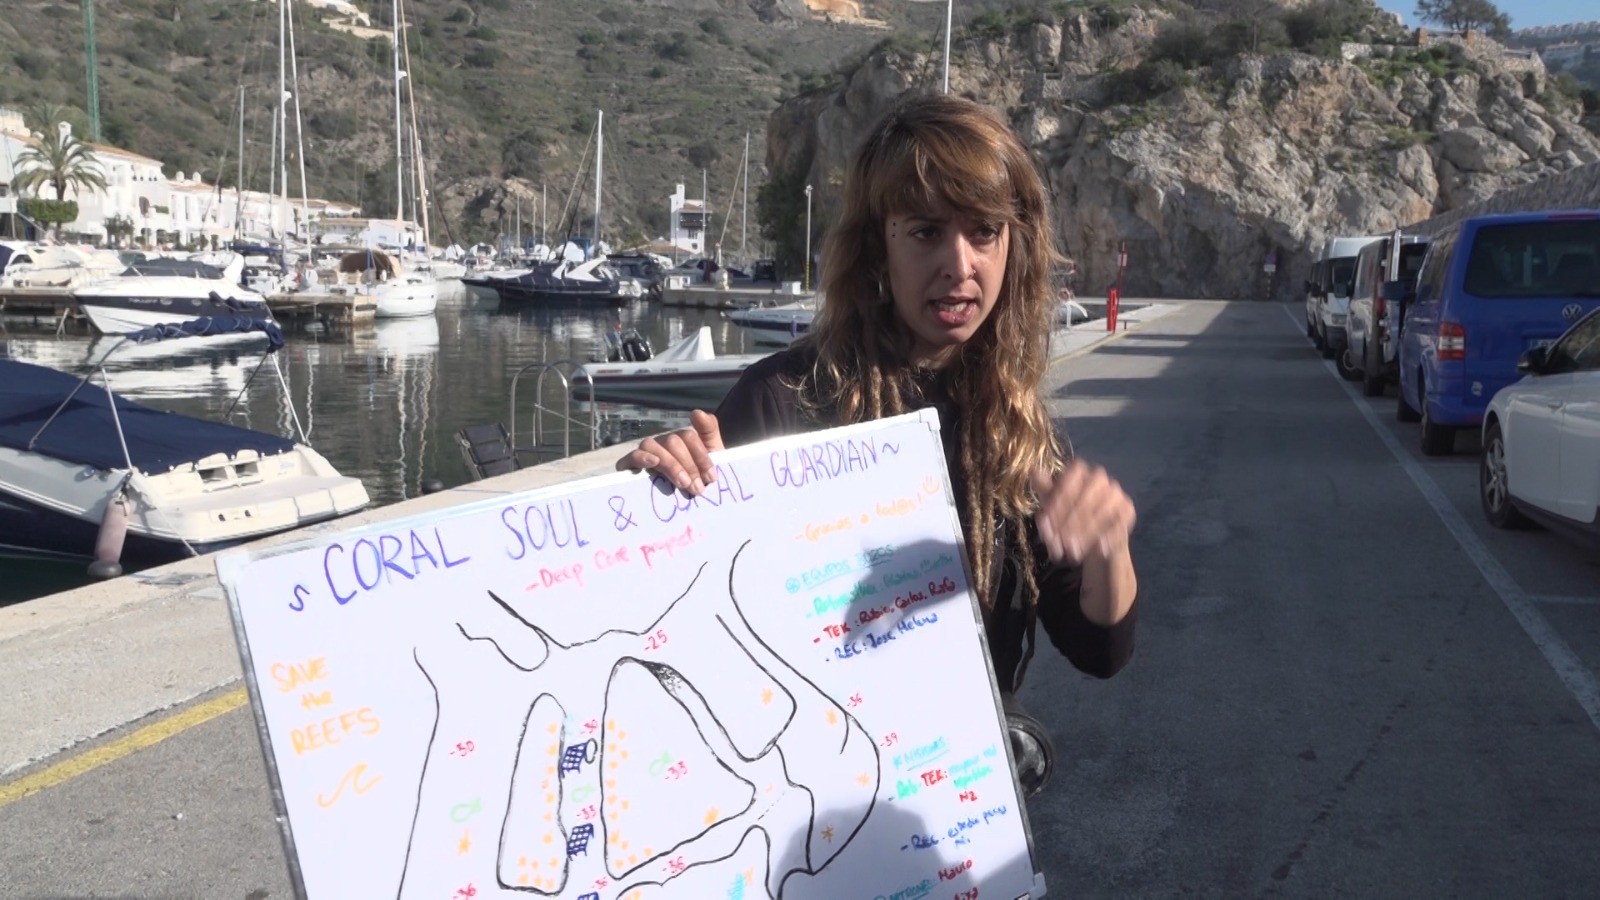 Marina Palacios sets out the plan for the day's dive with the 'Coral Soul' team in Granada, southern Spain./CGTN/Ken Browne